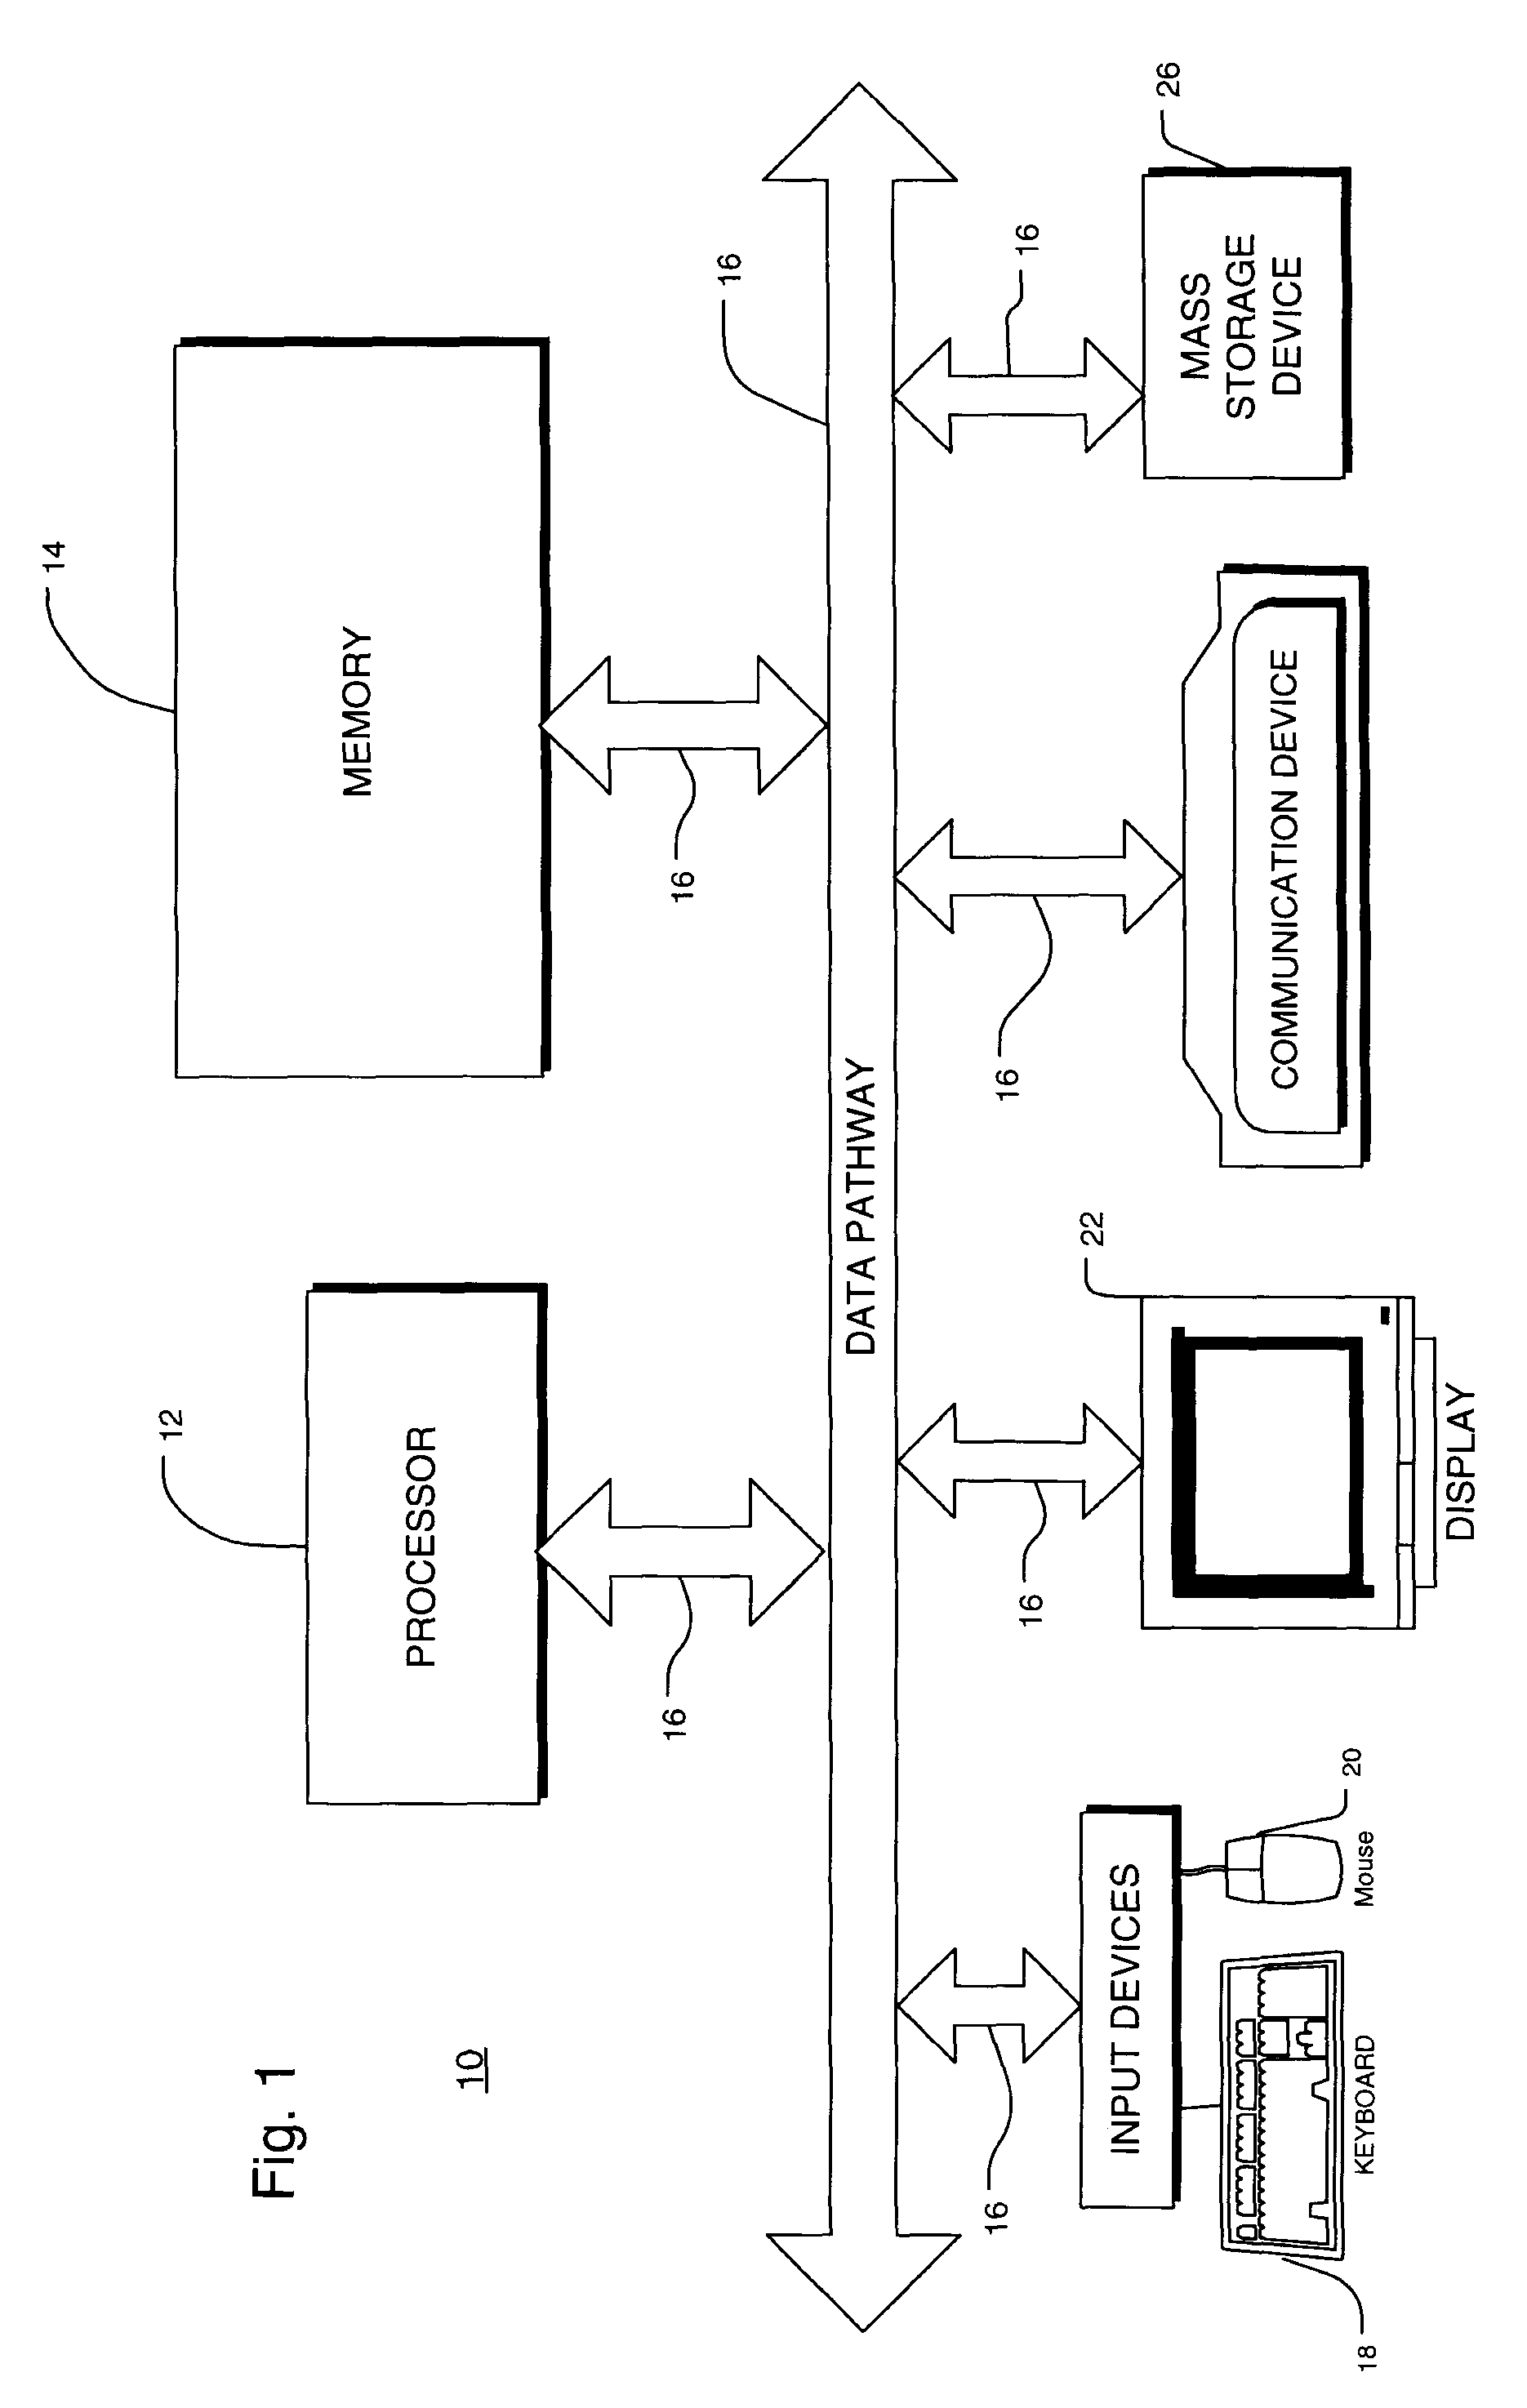 System and method for diagnosing faults utilizing baseline modeling techniques